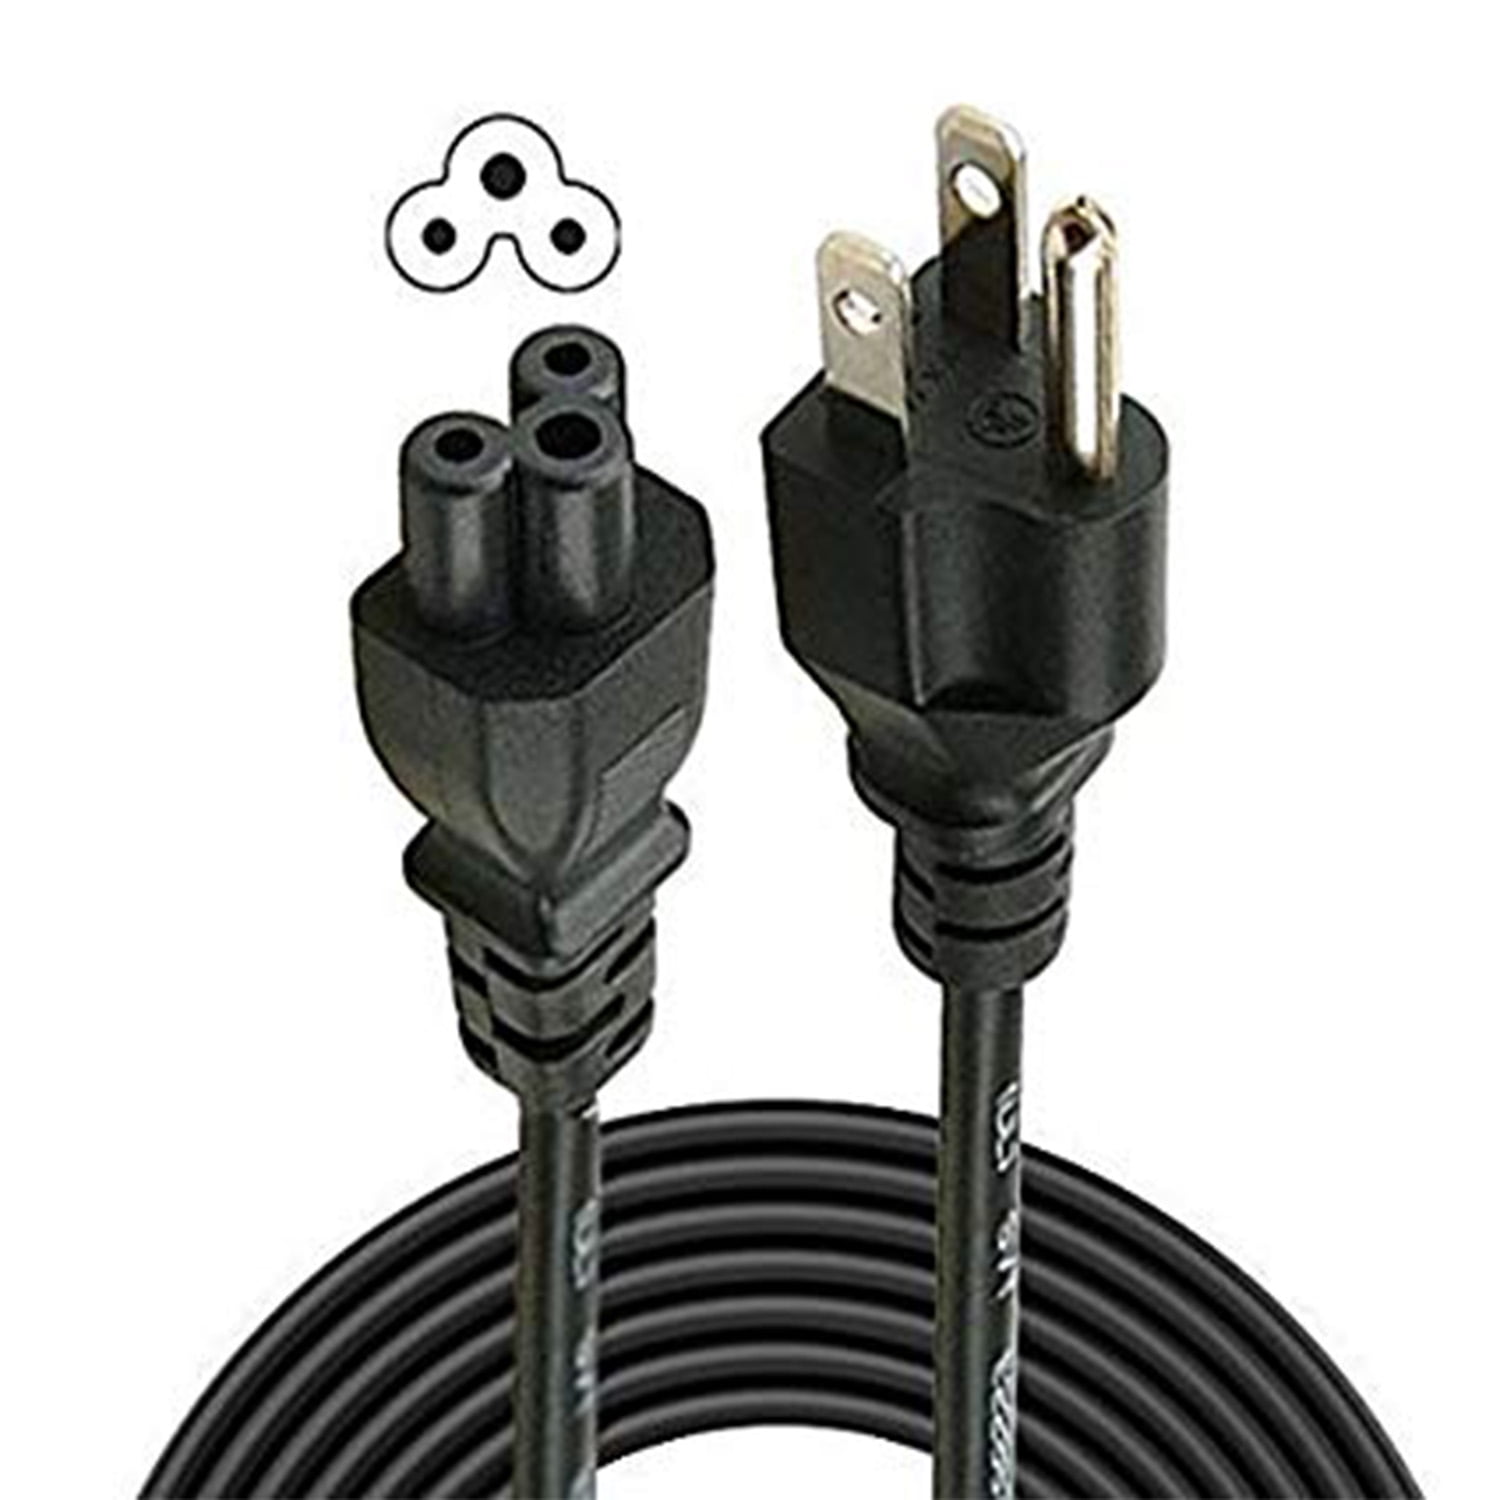 5 Ft Mickey Mouse Plug Cable for HP Pavilion Compaq Envy Spectre Stream Chromebook ProBook Elitebook Split x2 Omen 490371-001 Laptop Charger AC Adapter Power Cord